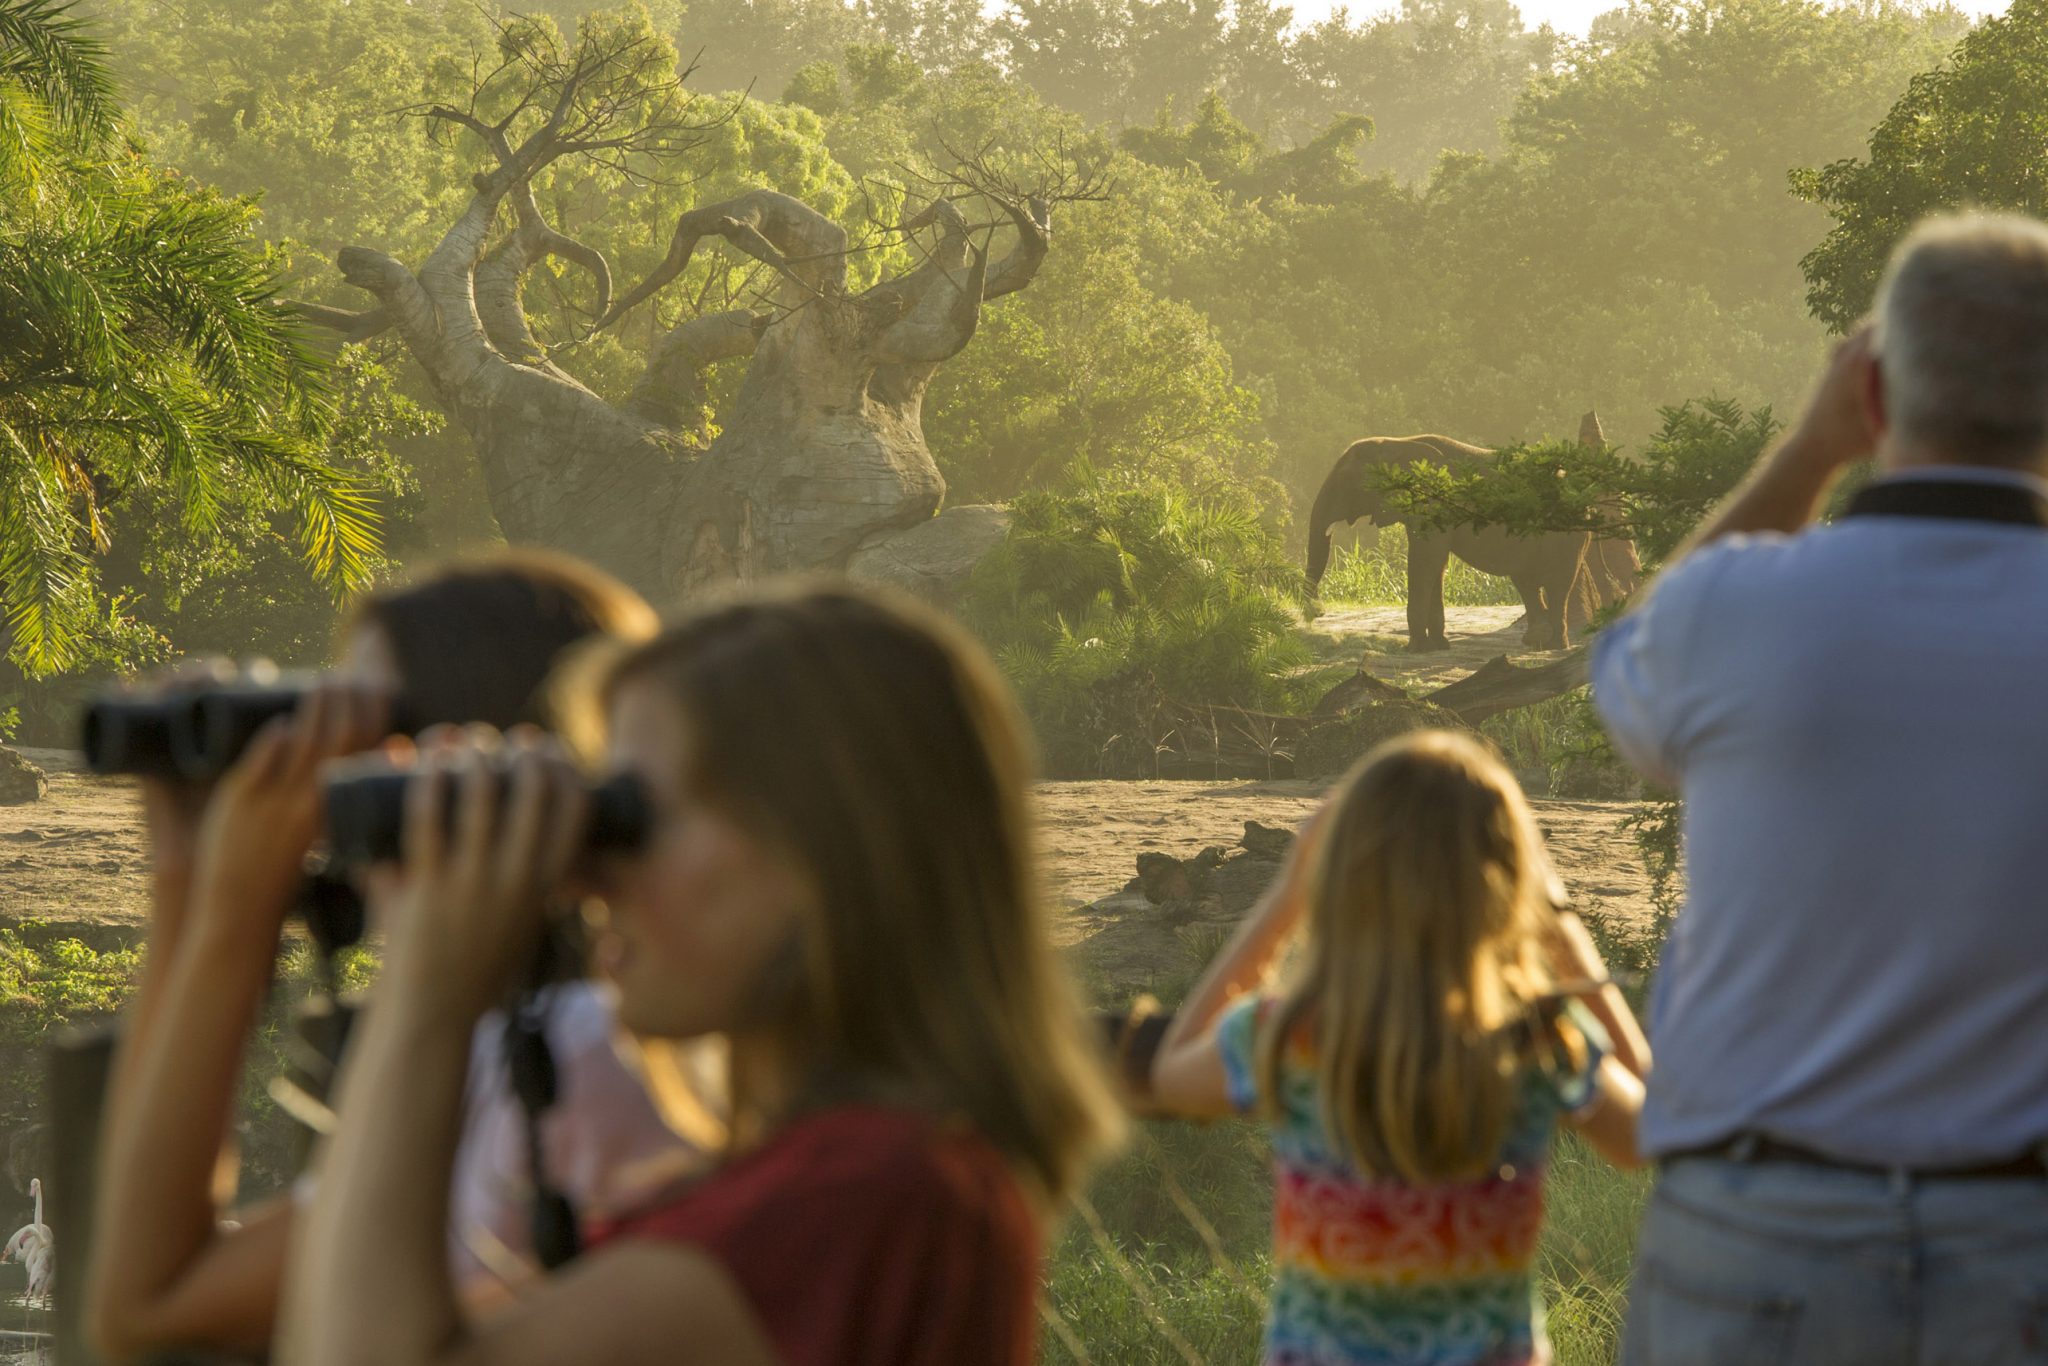 Guests look out over a wildlife-filled savanna on Wild Africa Trek, where adventure comes alive in an exciting experience at DisneyÕs Animal Kingdom. The add-on offering invites intrepid explorers to up-close encounters with the parkÕs wildlife. As part of their expert-led adventure, guests take safari vehicles to a serene overlook where they can savor Africa-inspired food and beverage while observing giraffes, elephants, gazelle and more. DisneyÕs Animal Kingdom is part of Walt Disney World Resort in Lake Buena Vista, Fla. (Kent Phillips, Photographer)